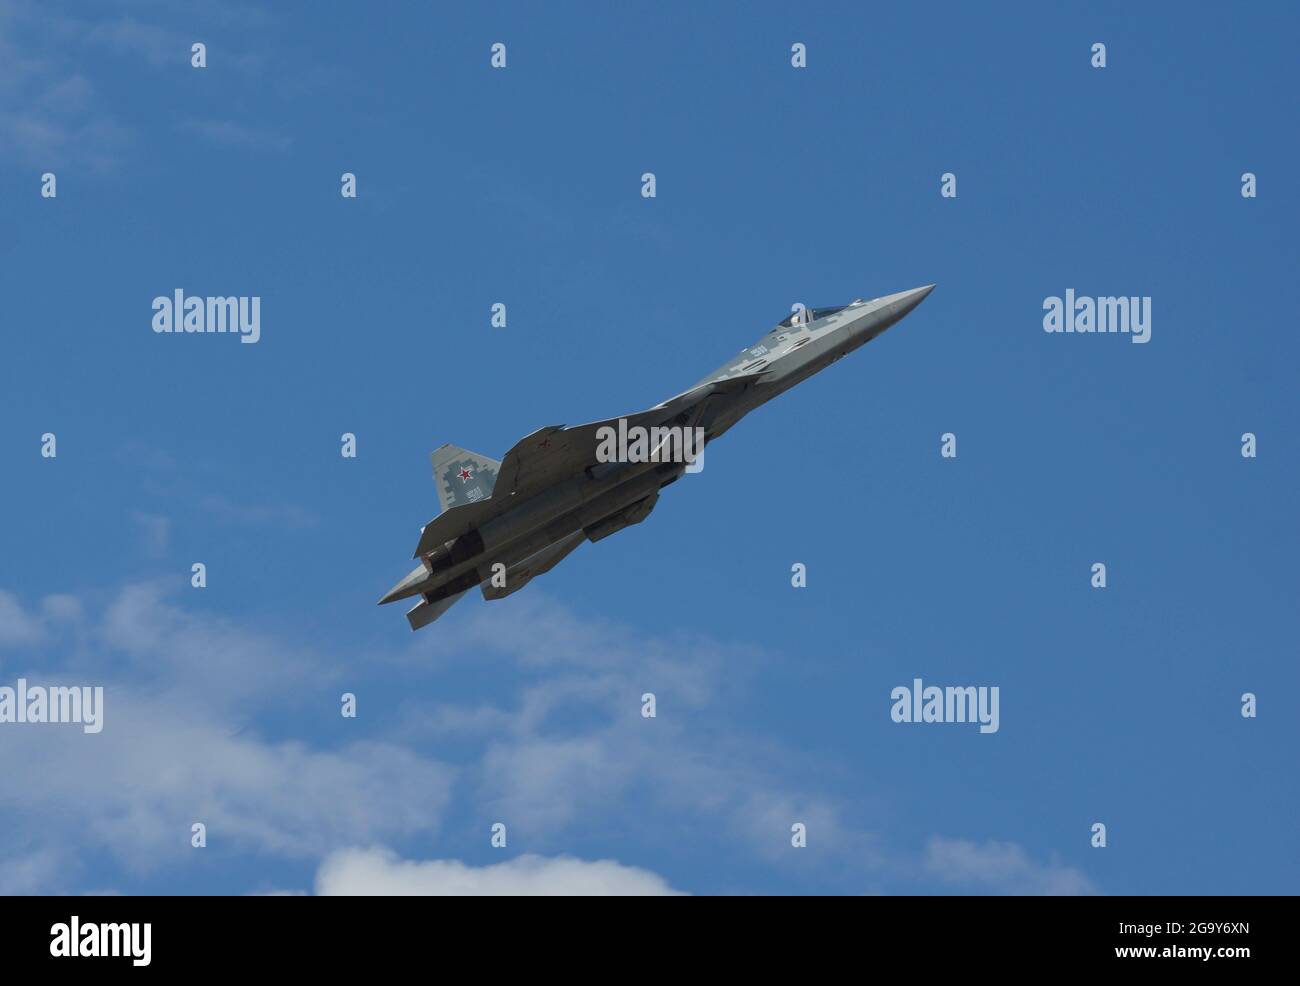 MAKS-2021 Moscow region, Zhukovsky, July 20-25, 2021. Fighter of the 5th generation Su-57 Stock Photo